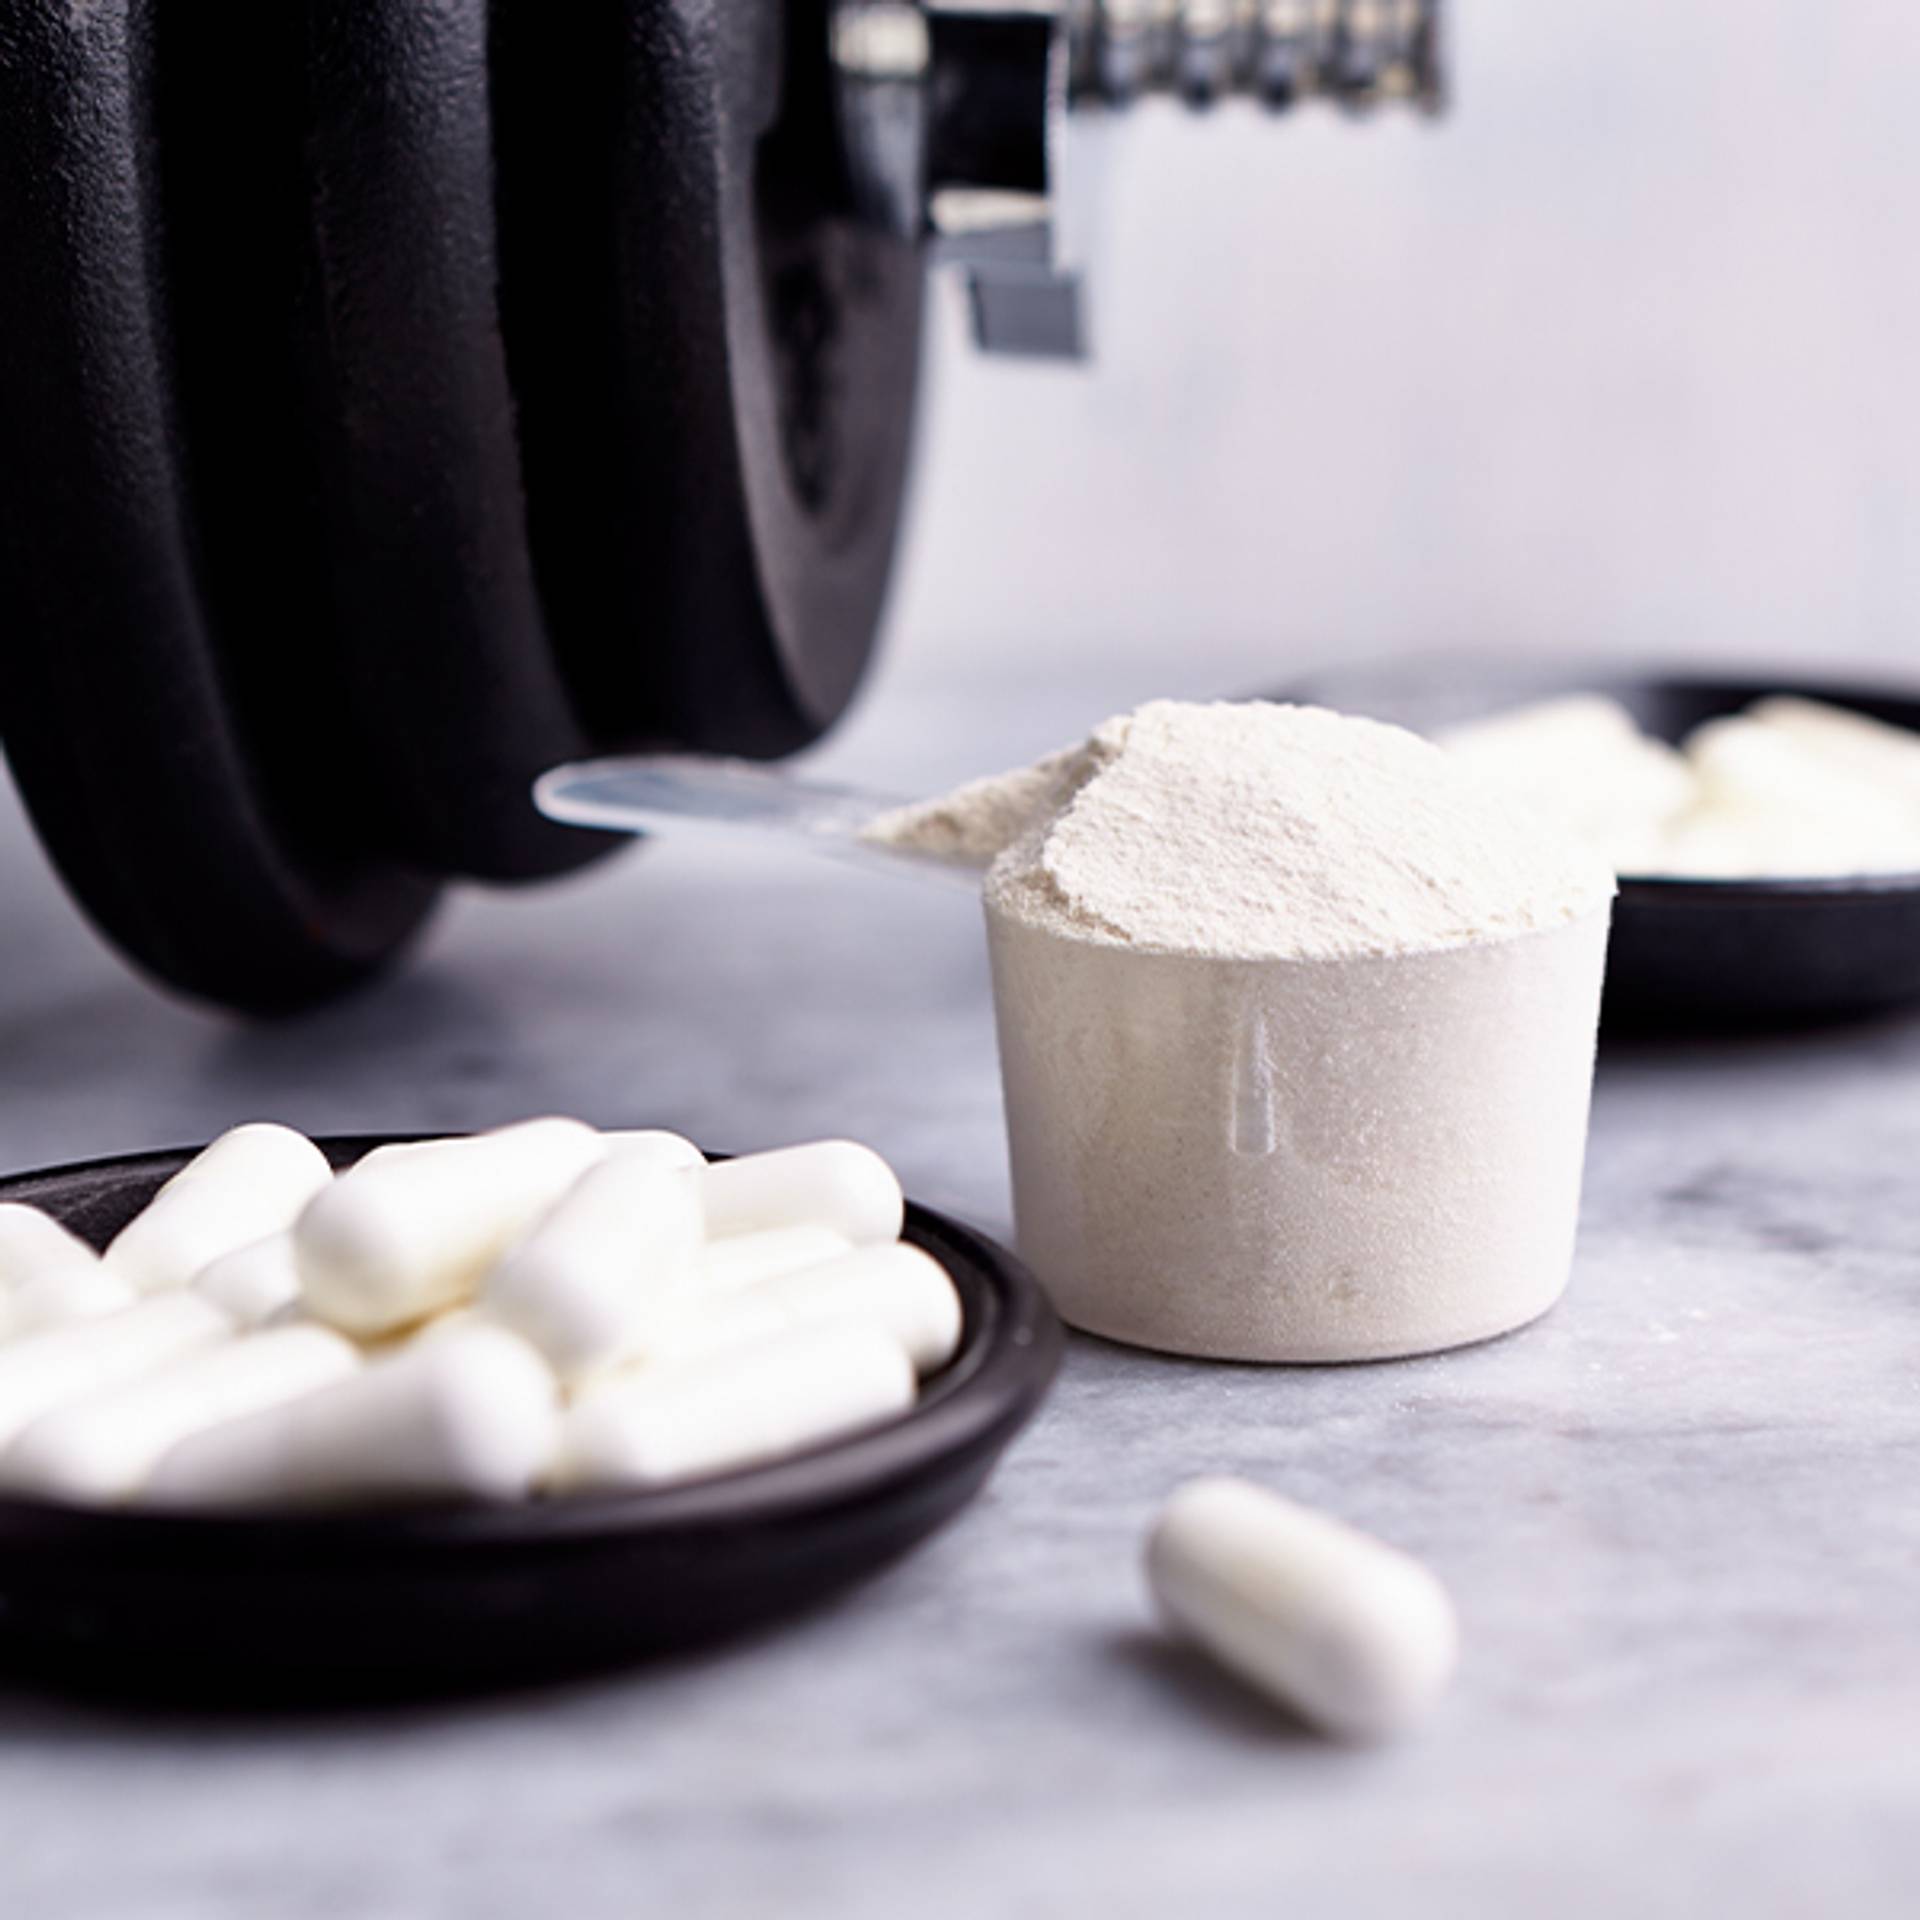 Creatine for more muscle strength and performance